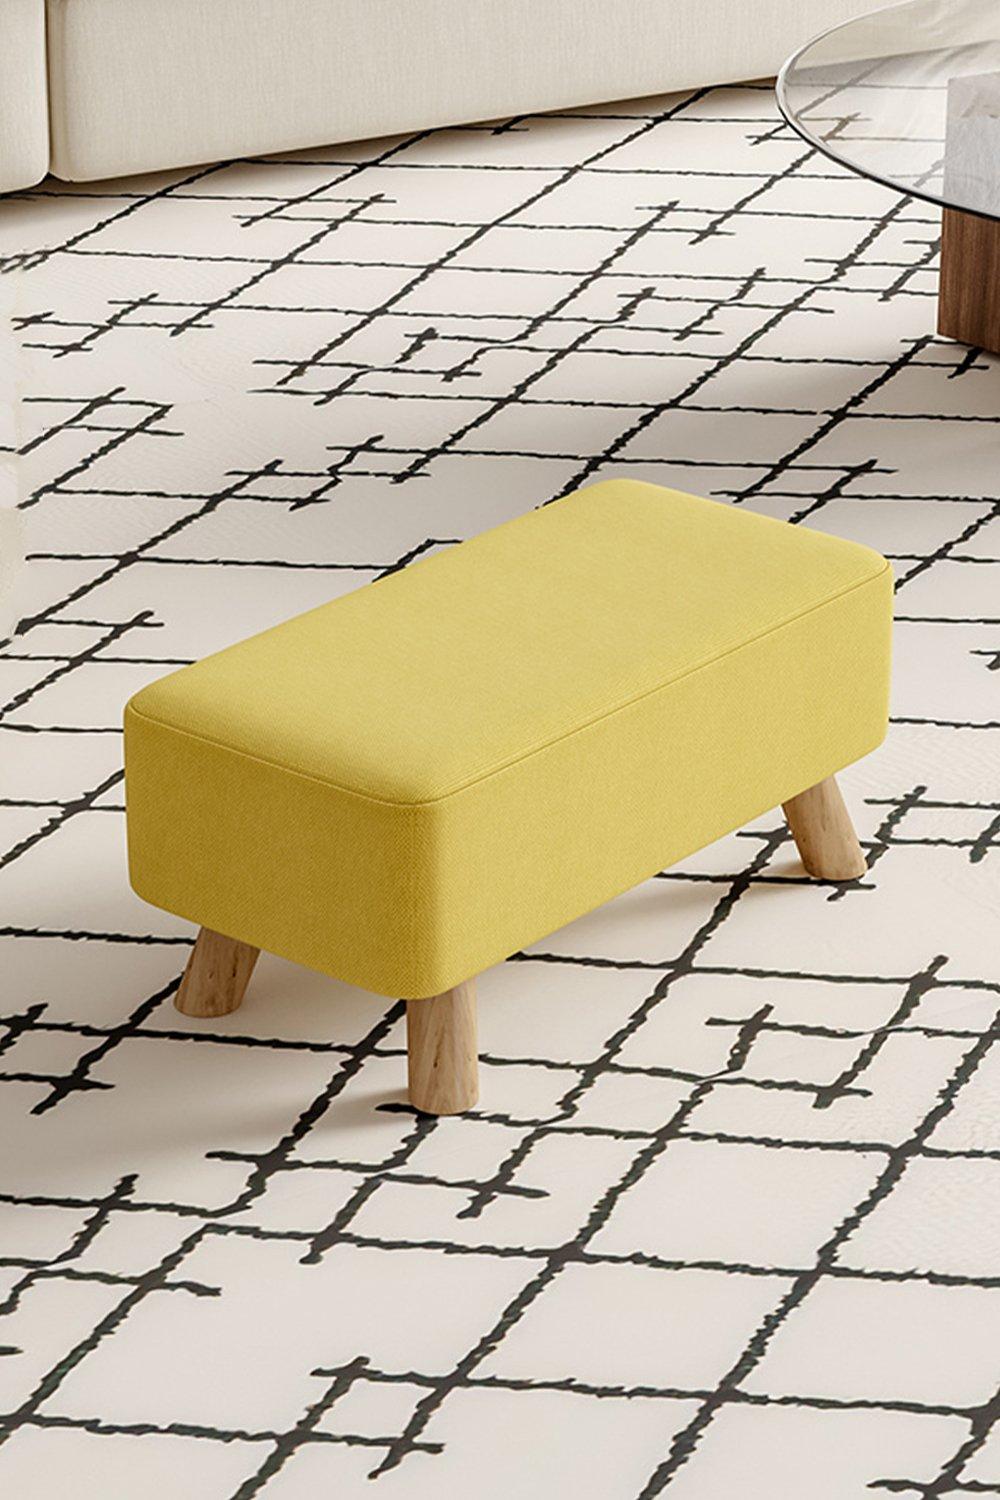 Yellow Linen Rectangular Footstool Shoes Changing Stool with Pine Leg